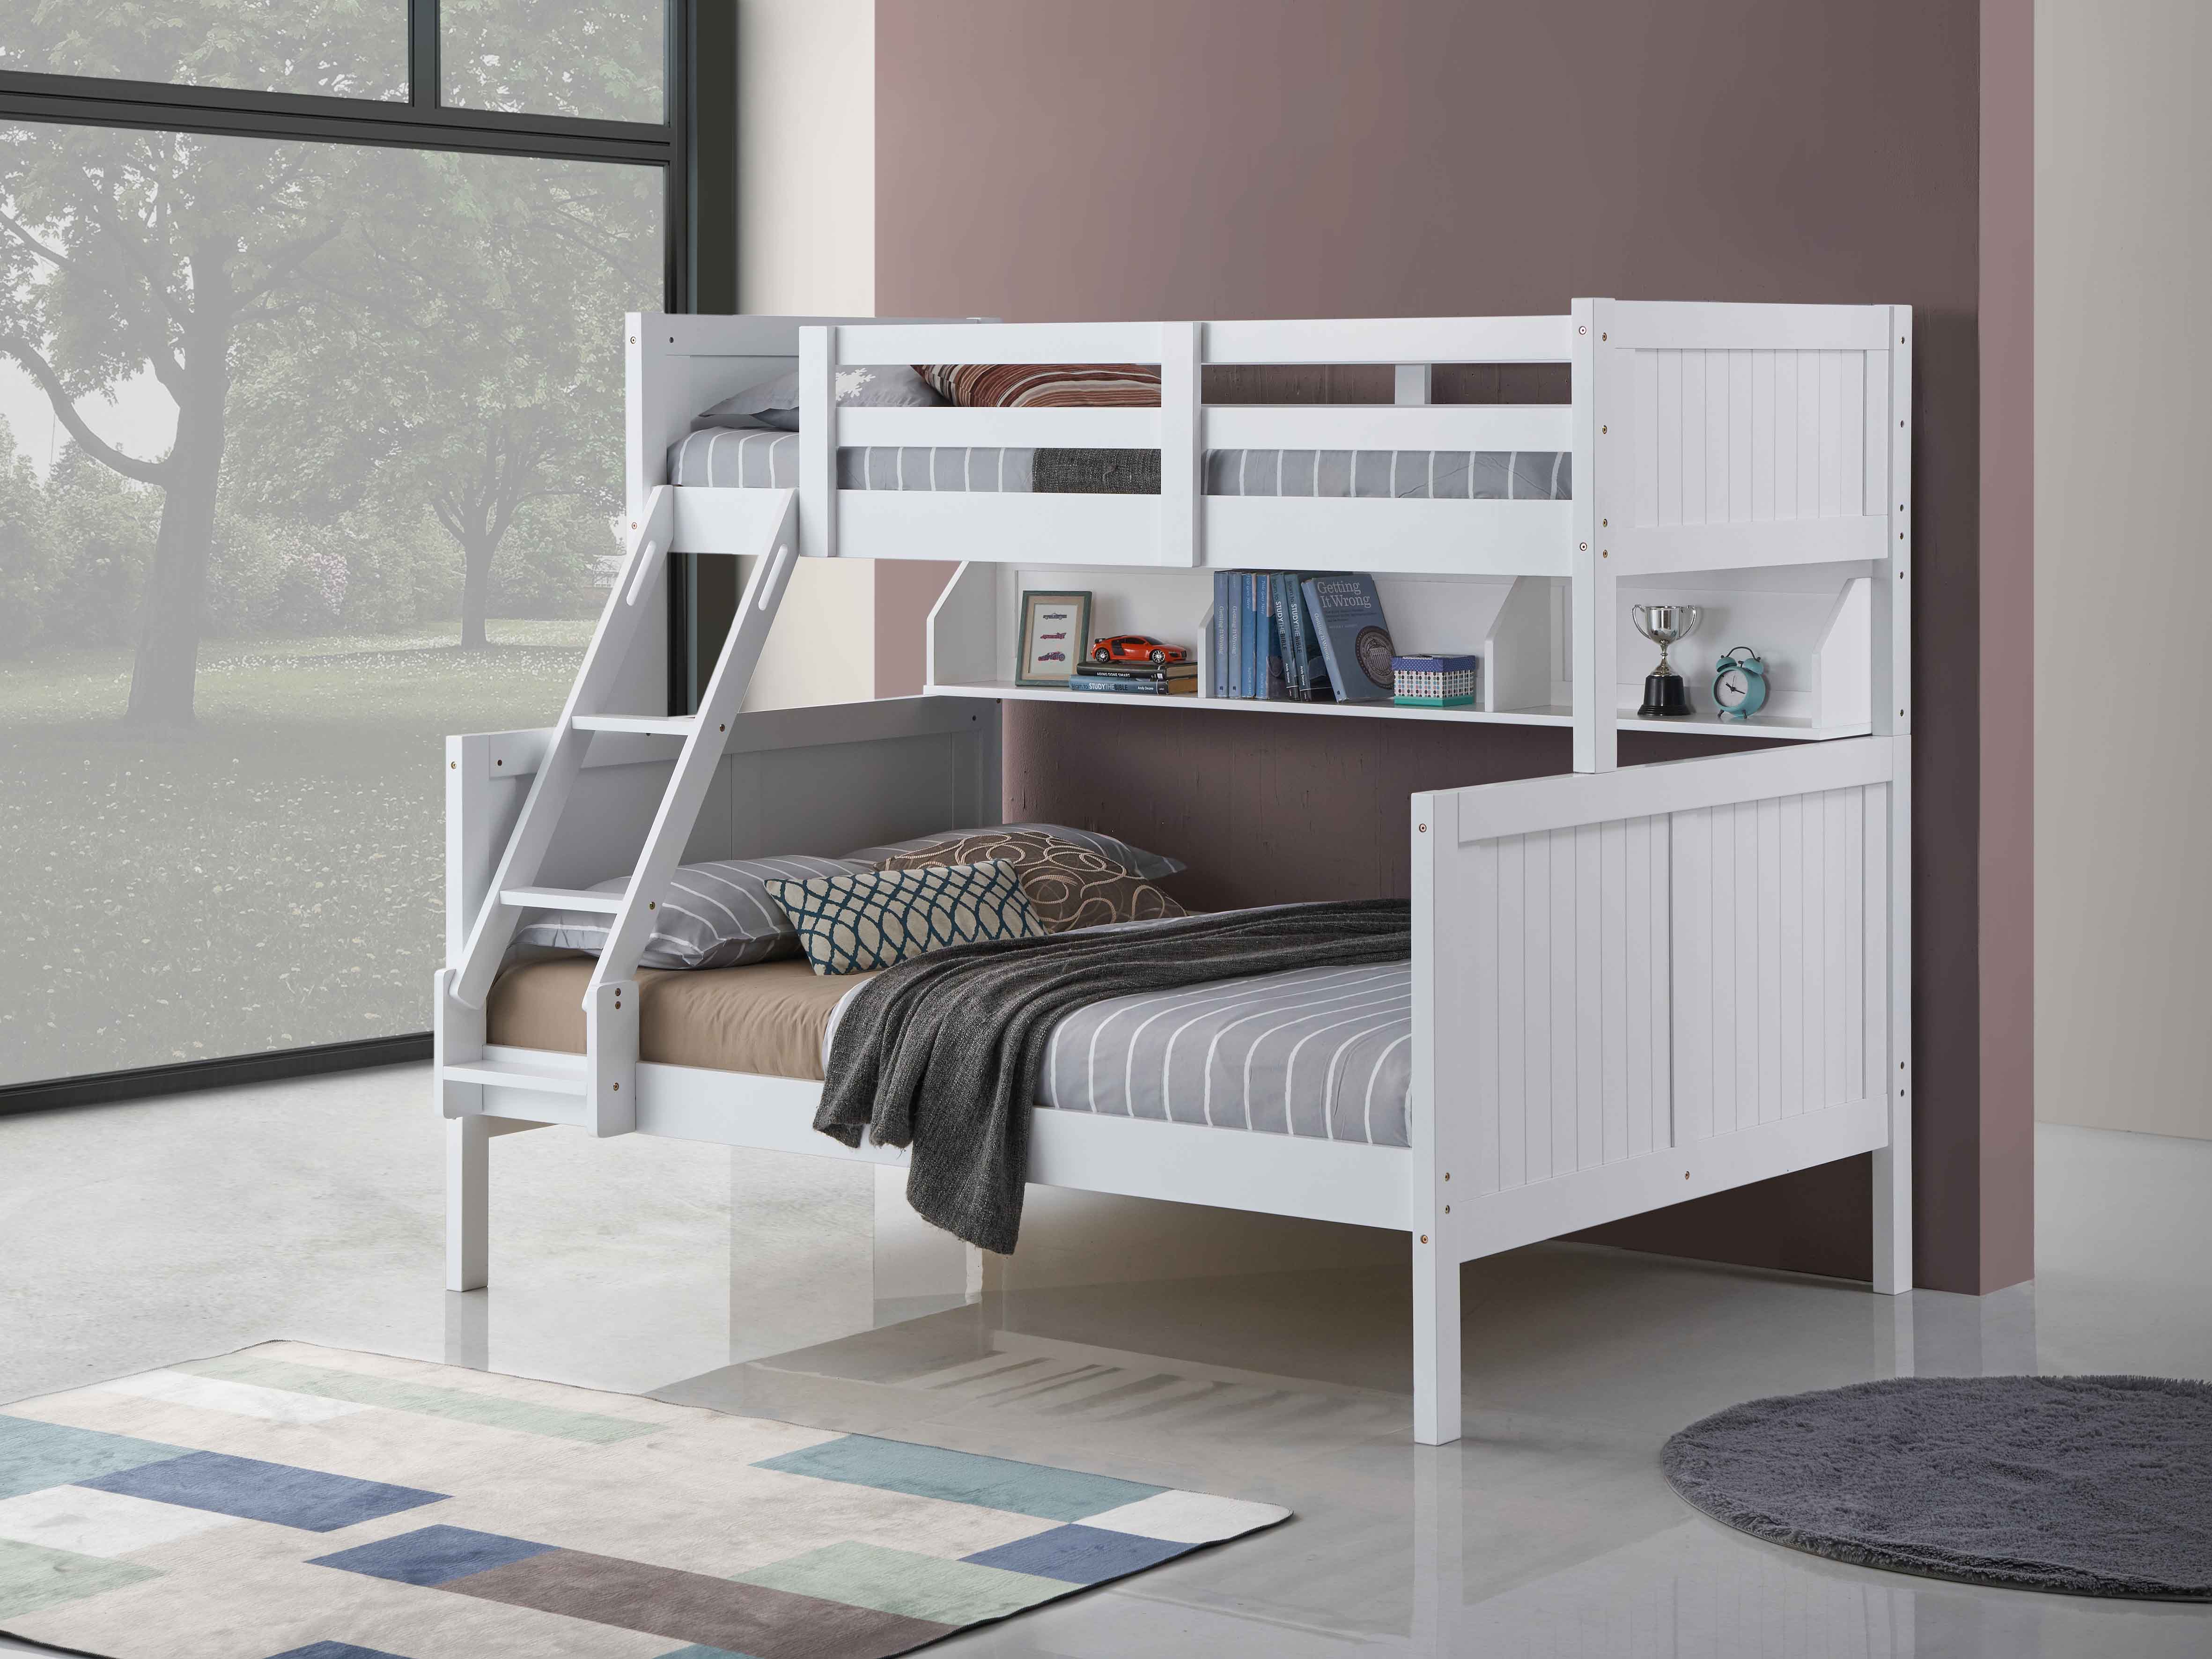 Double Bunk Bed Storage Trundle, Small Double Bunk Bed With Trundle